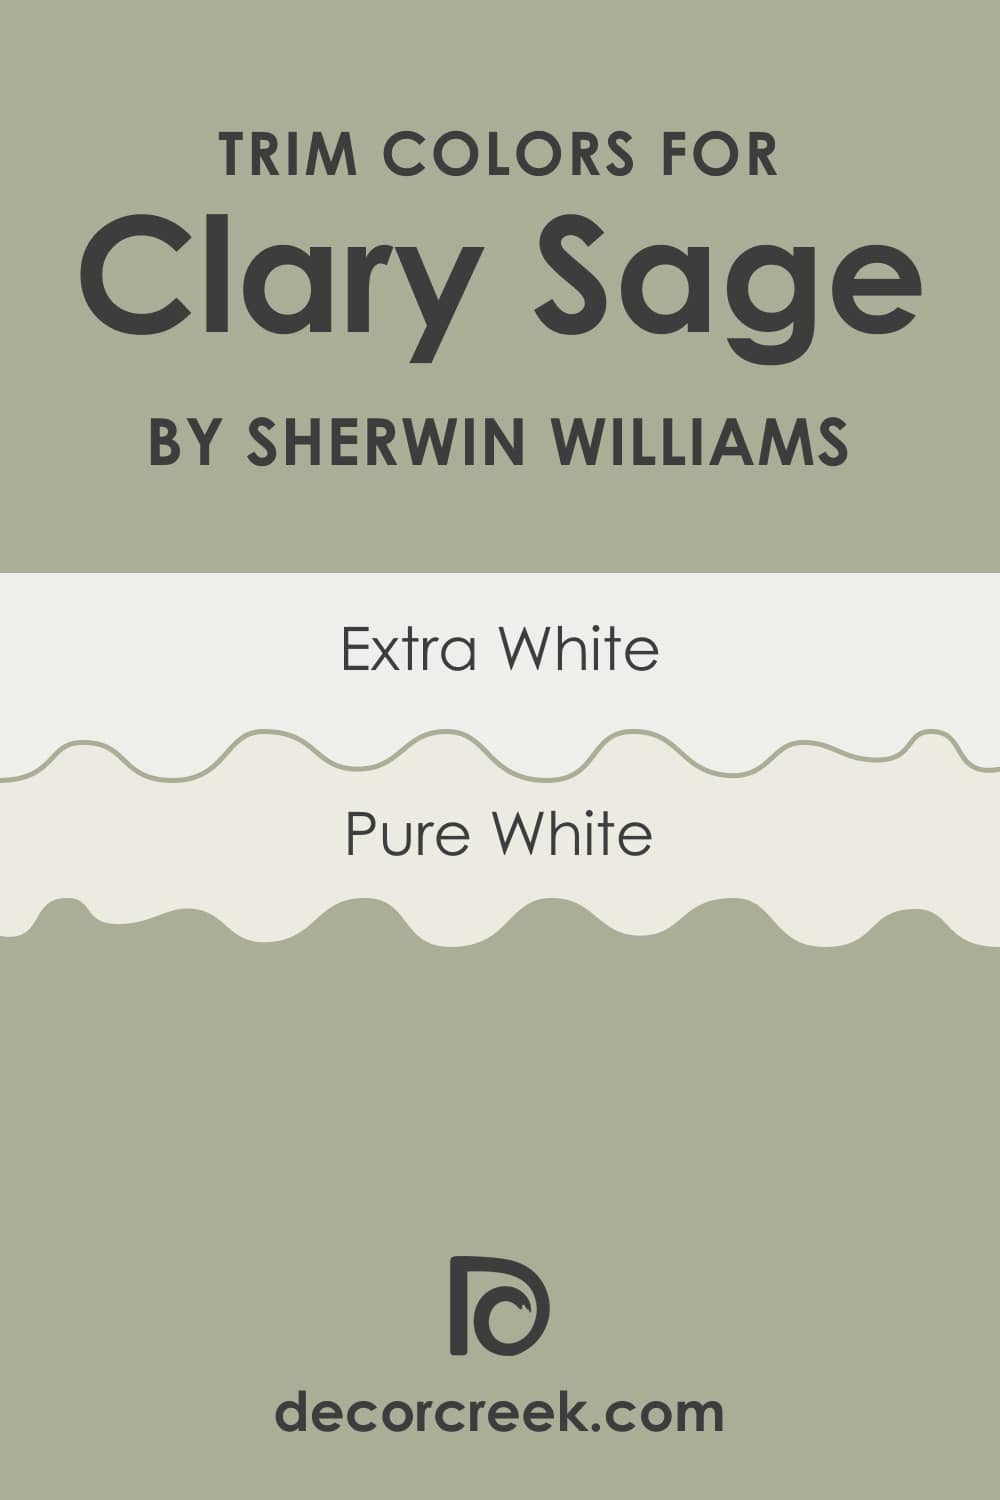 What Is the Best Trim Color for Clary Sage SW-6178?